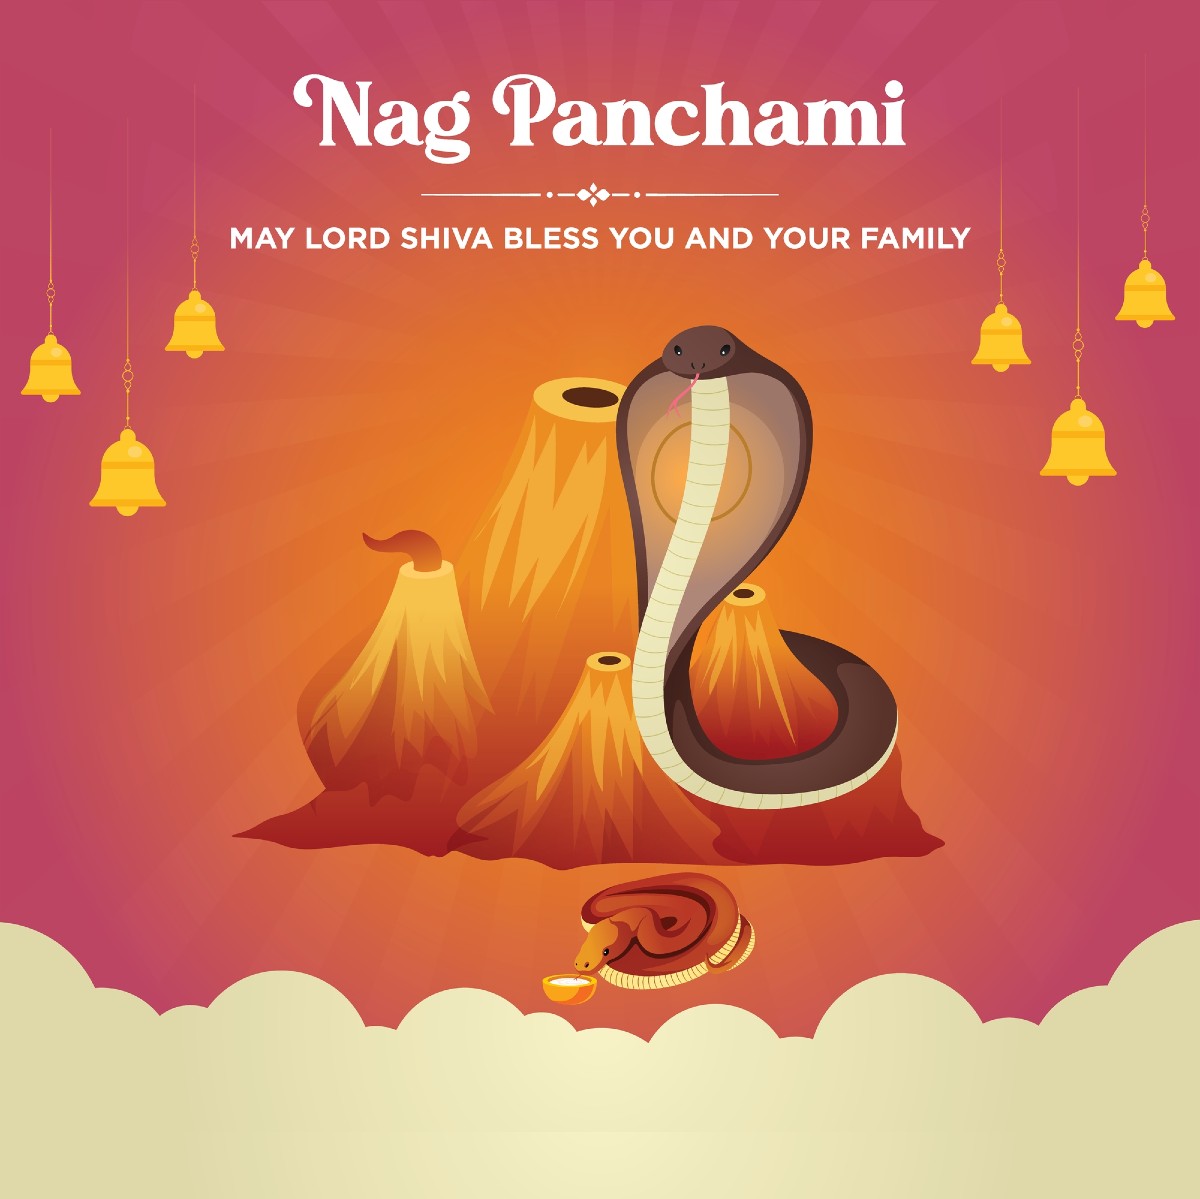 Happy Nag Panchami 2022 Images, Wishes, Quotes, Messages and WhatsApp